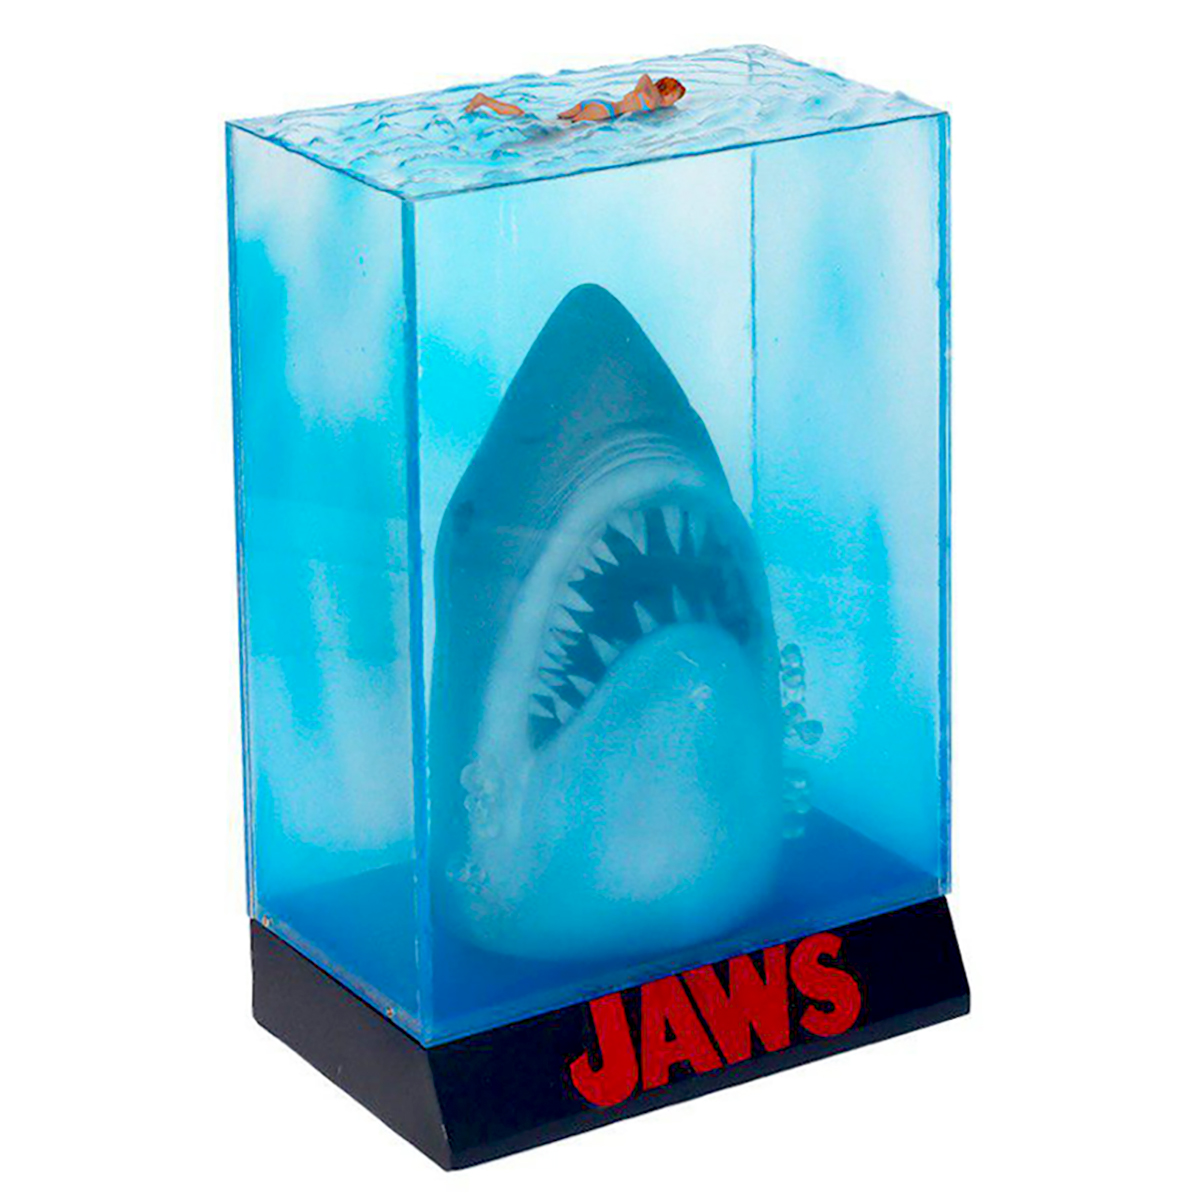 Jaws 3D Poster Statue The great white shark - Figures buy now in